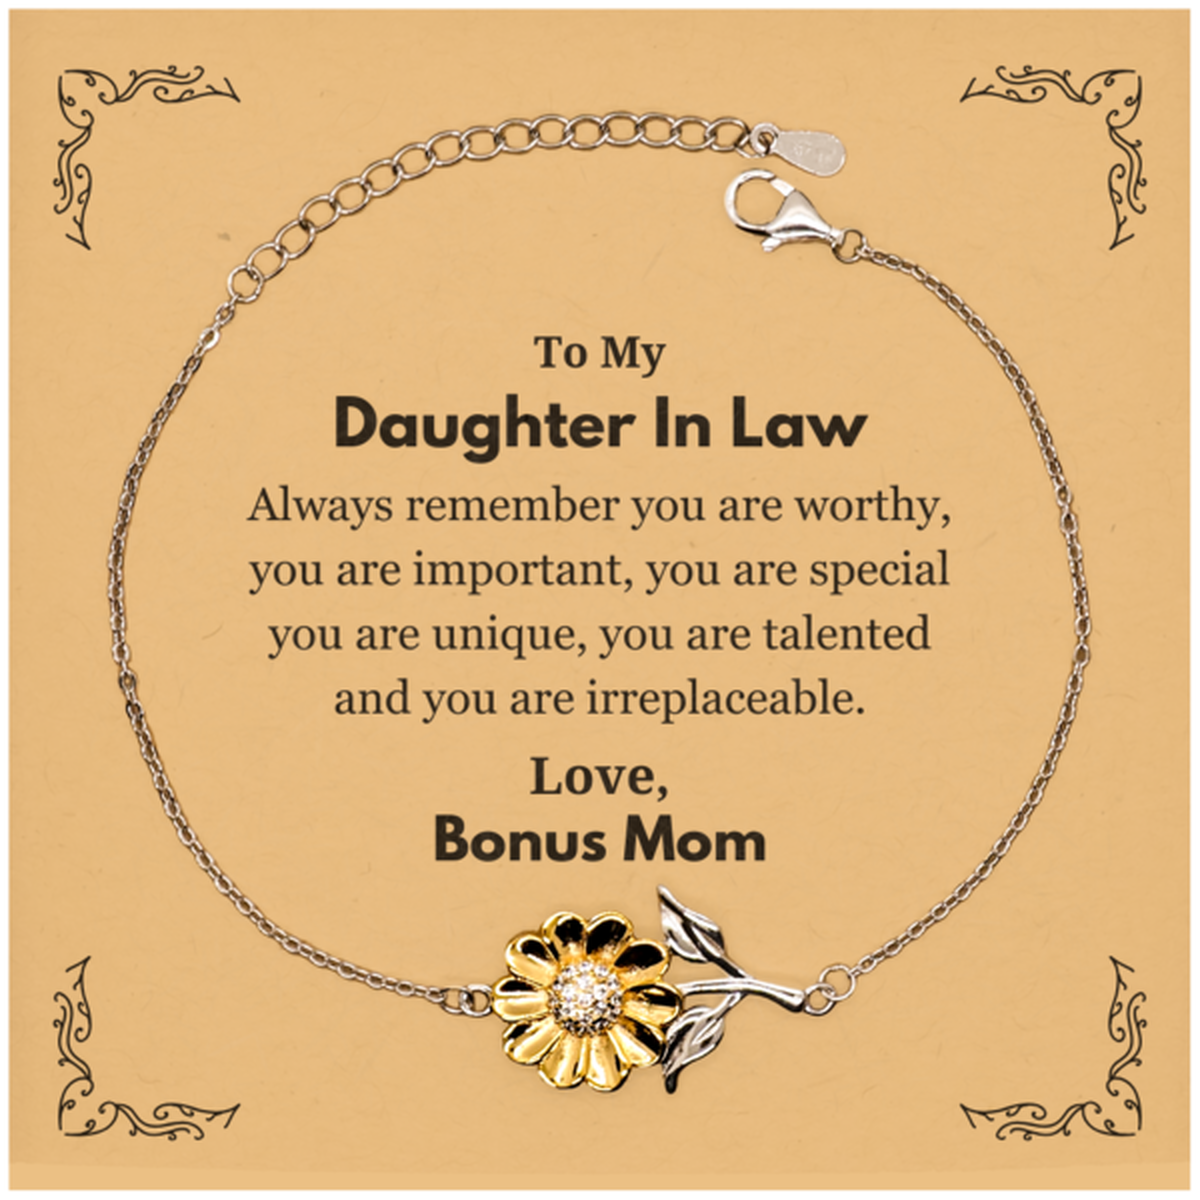 Daughter In Law Birthday Gifts from Bonus Mom, Inspirational Sunflower Bracelet for Daughter In Law Christmas Graduation Gifts for Daughter In Law Always remember you are worthy, you are important. Love, Bonus Mom